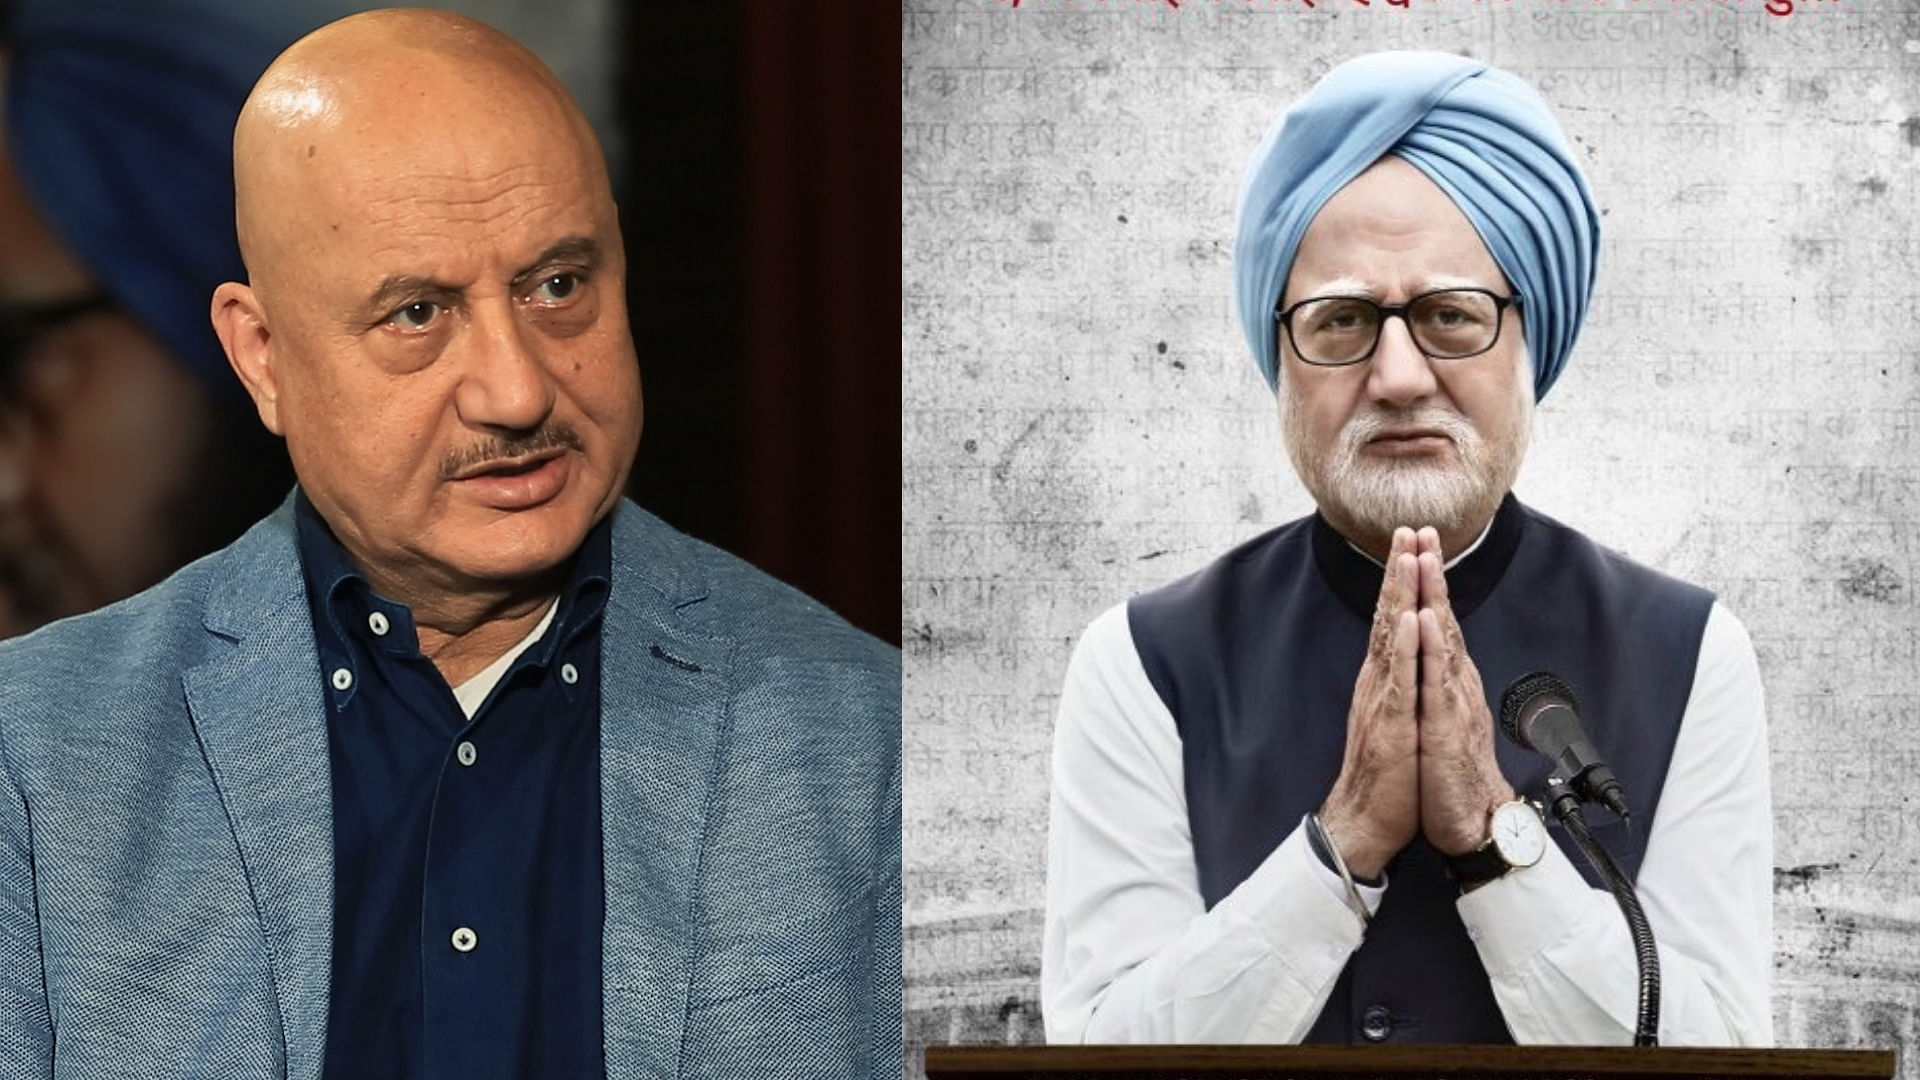 Anupam Kher talks about playing Dr Manmohan Singh in <i>The Accidental Prime Minister.</i>